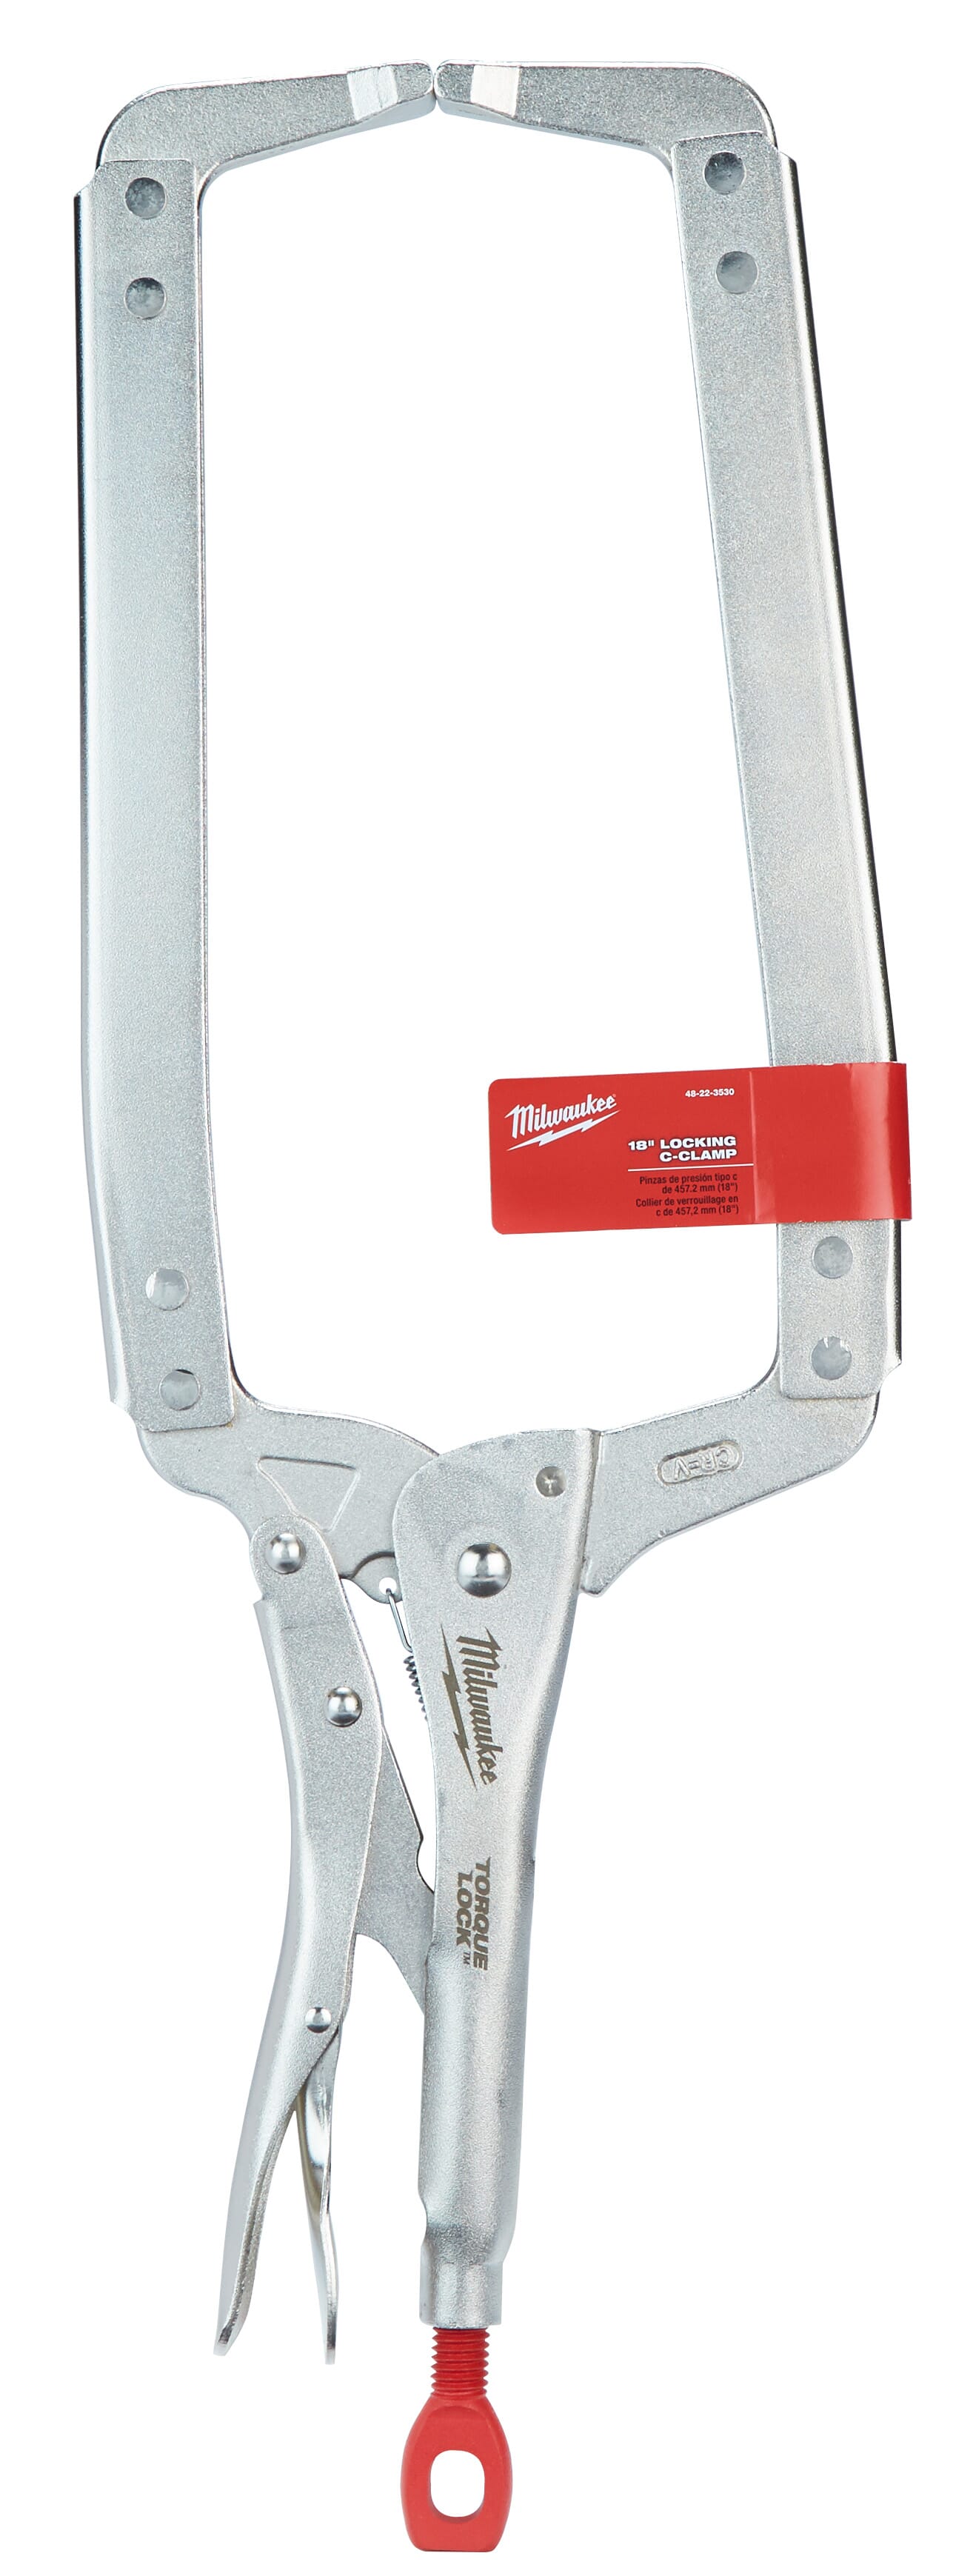 Milwaukee® TORQUE LOCK™ 48-22-3530 Regular Jaw Locking C-Clamp, 9-1/2 in D Throat, 9-1/2 in Jaw Opening, Forged Alloy Steel